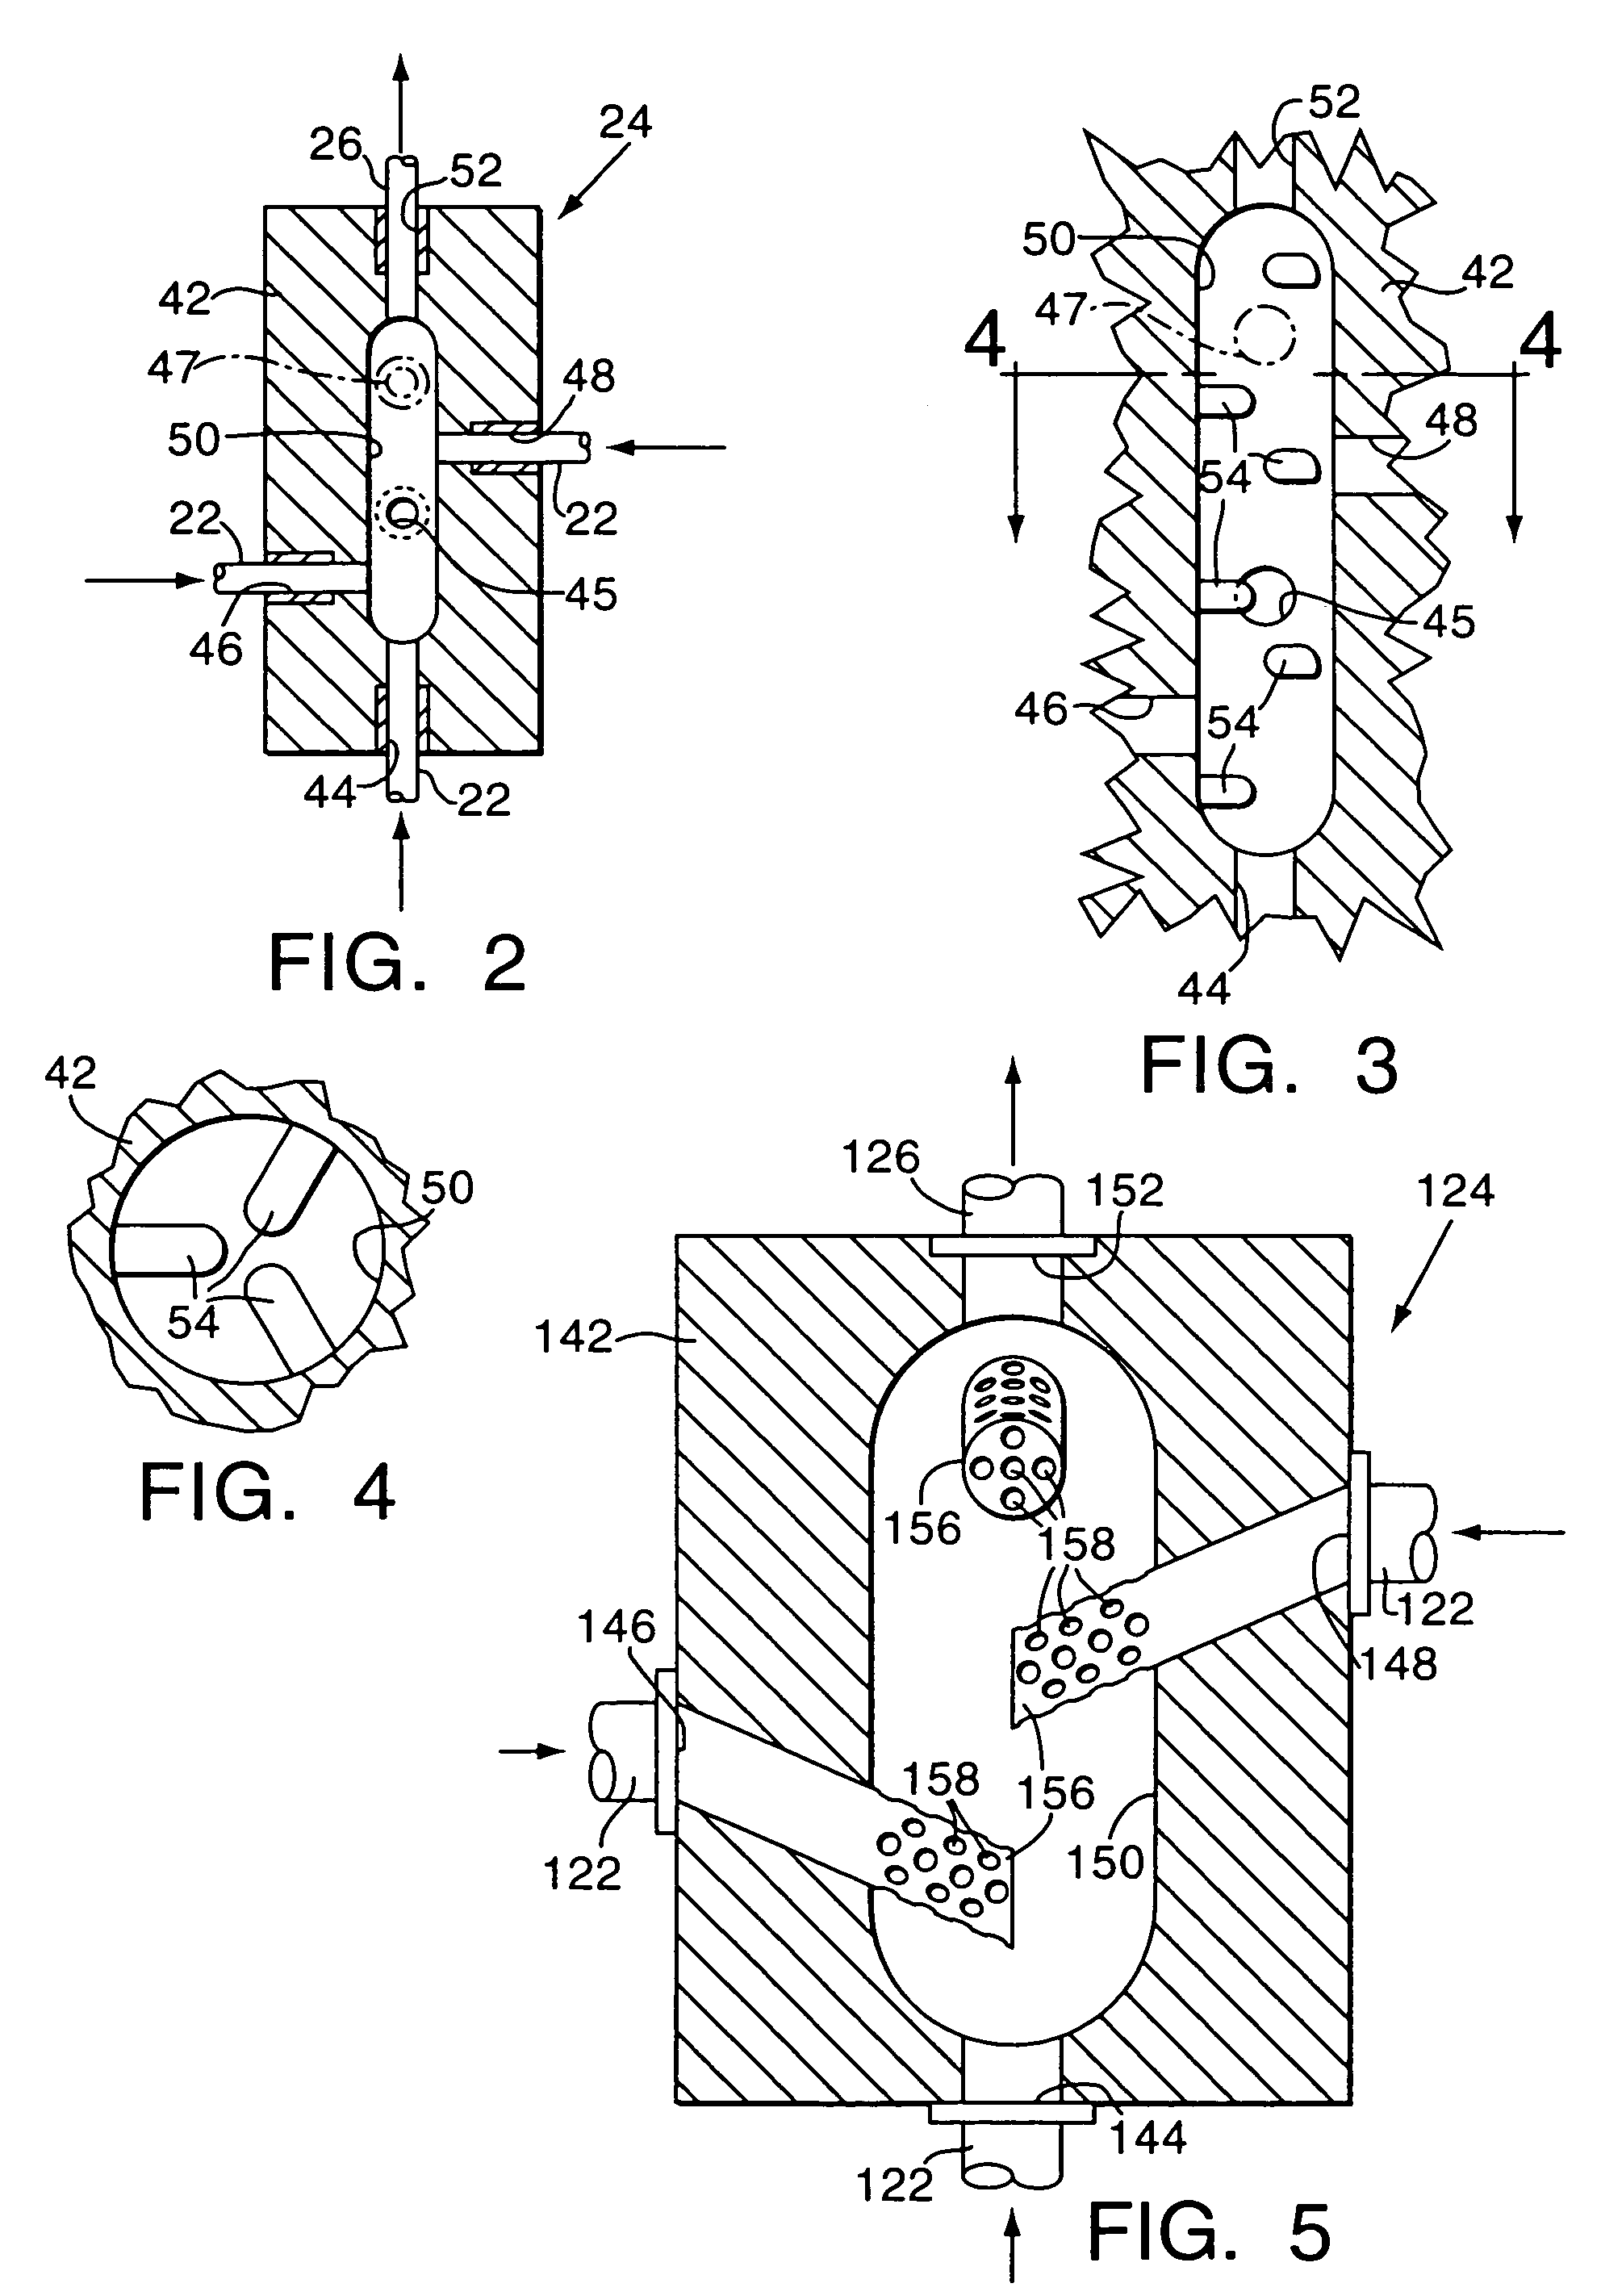 Apparatus and method for mixing fluids for analysis